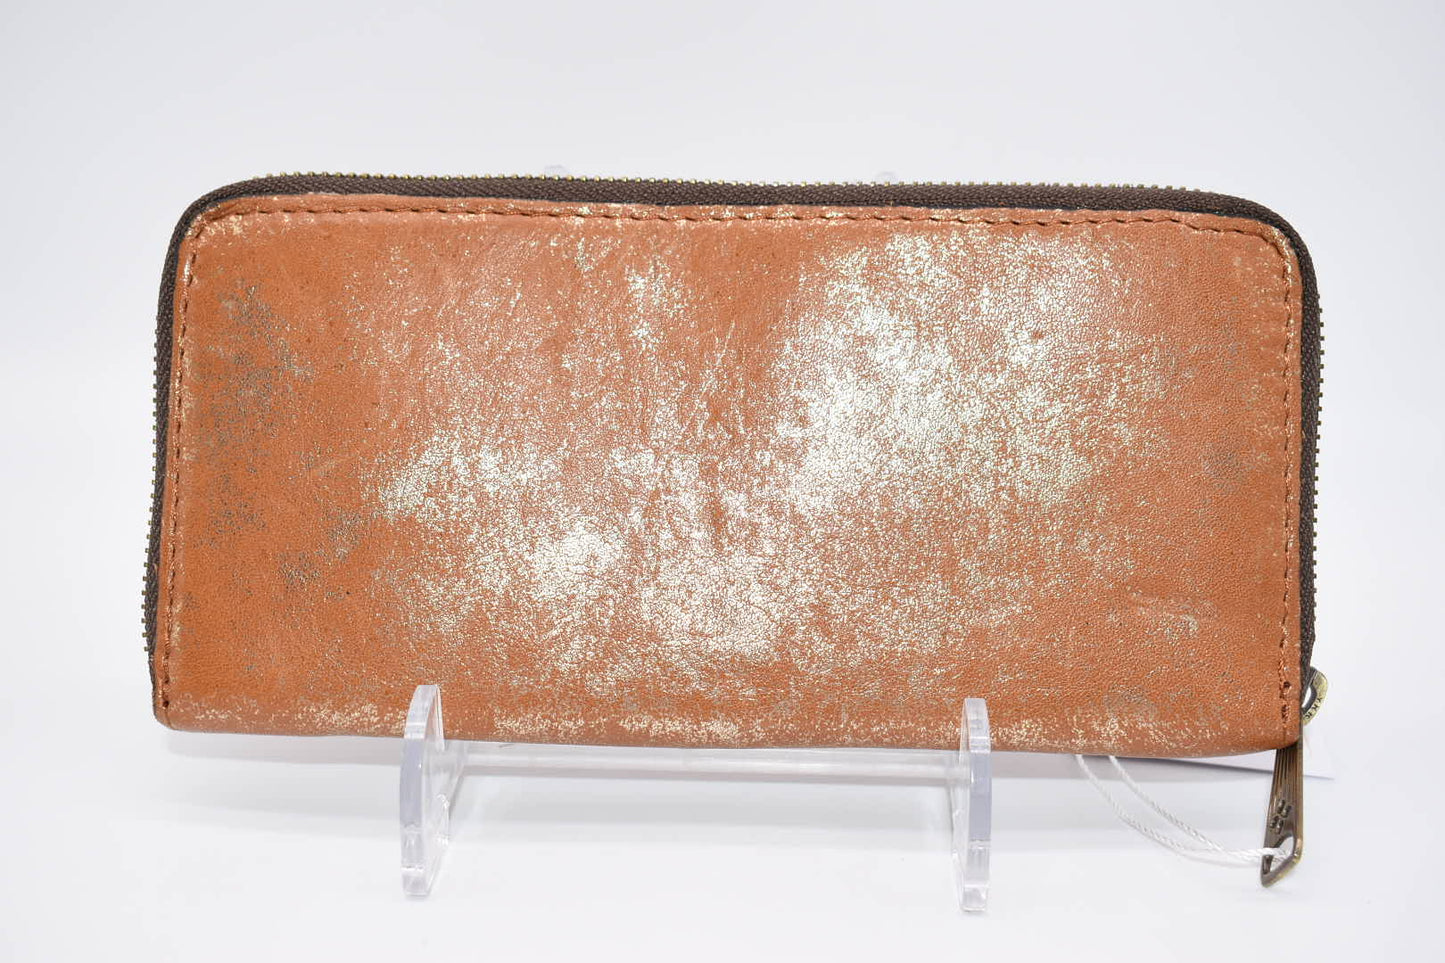 Patricia Nash Laurie Leather Wallet in Tan & Gold Shimmer